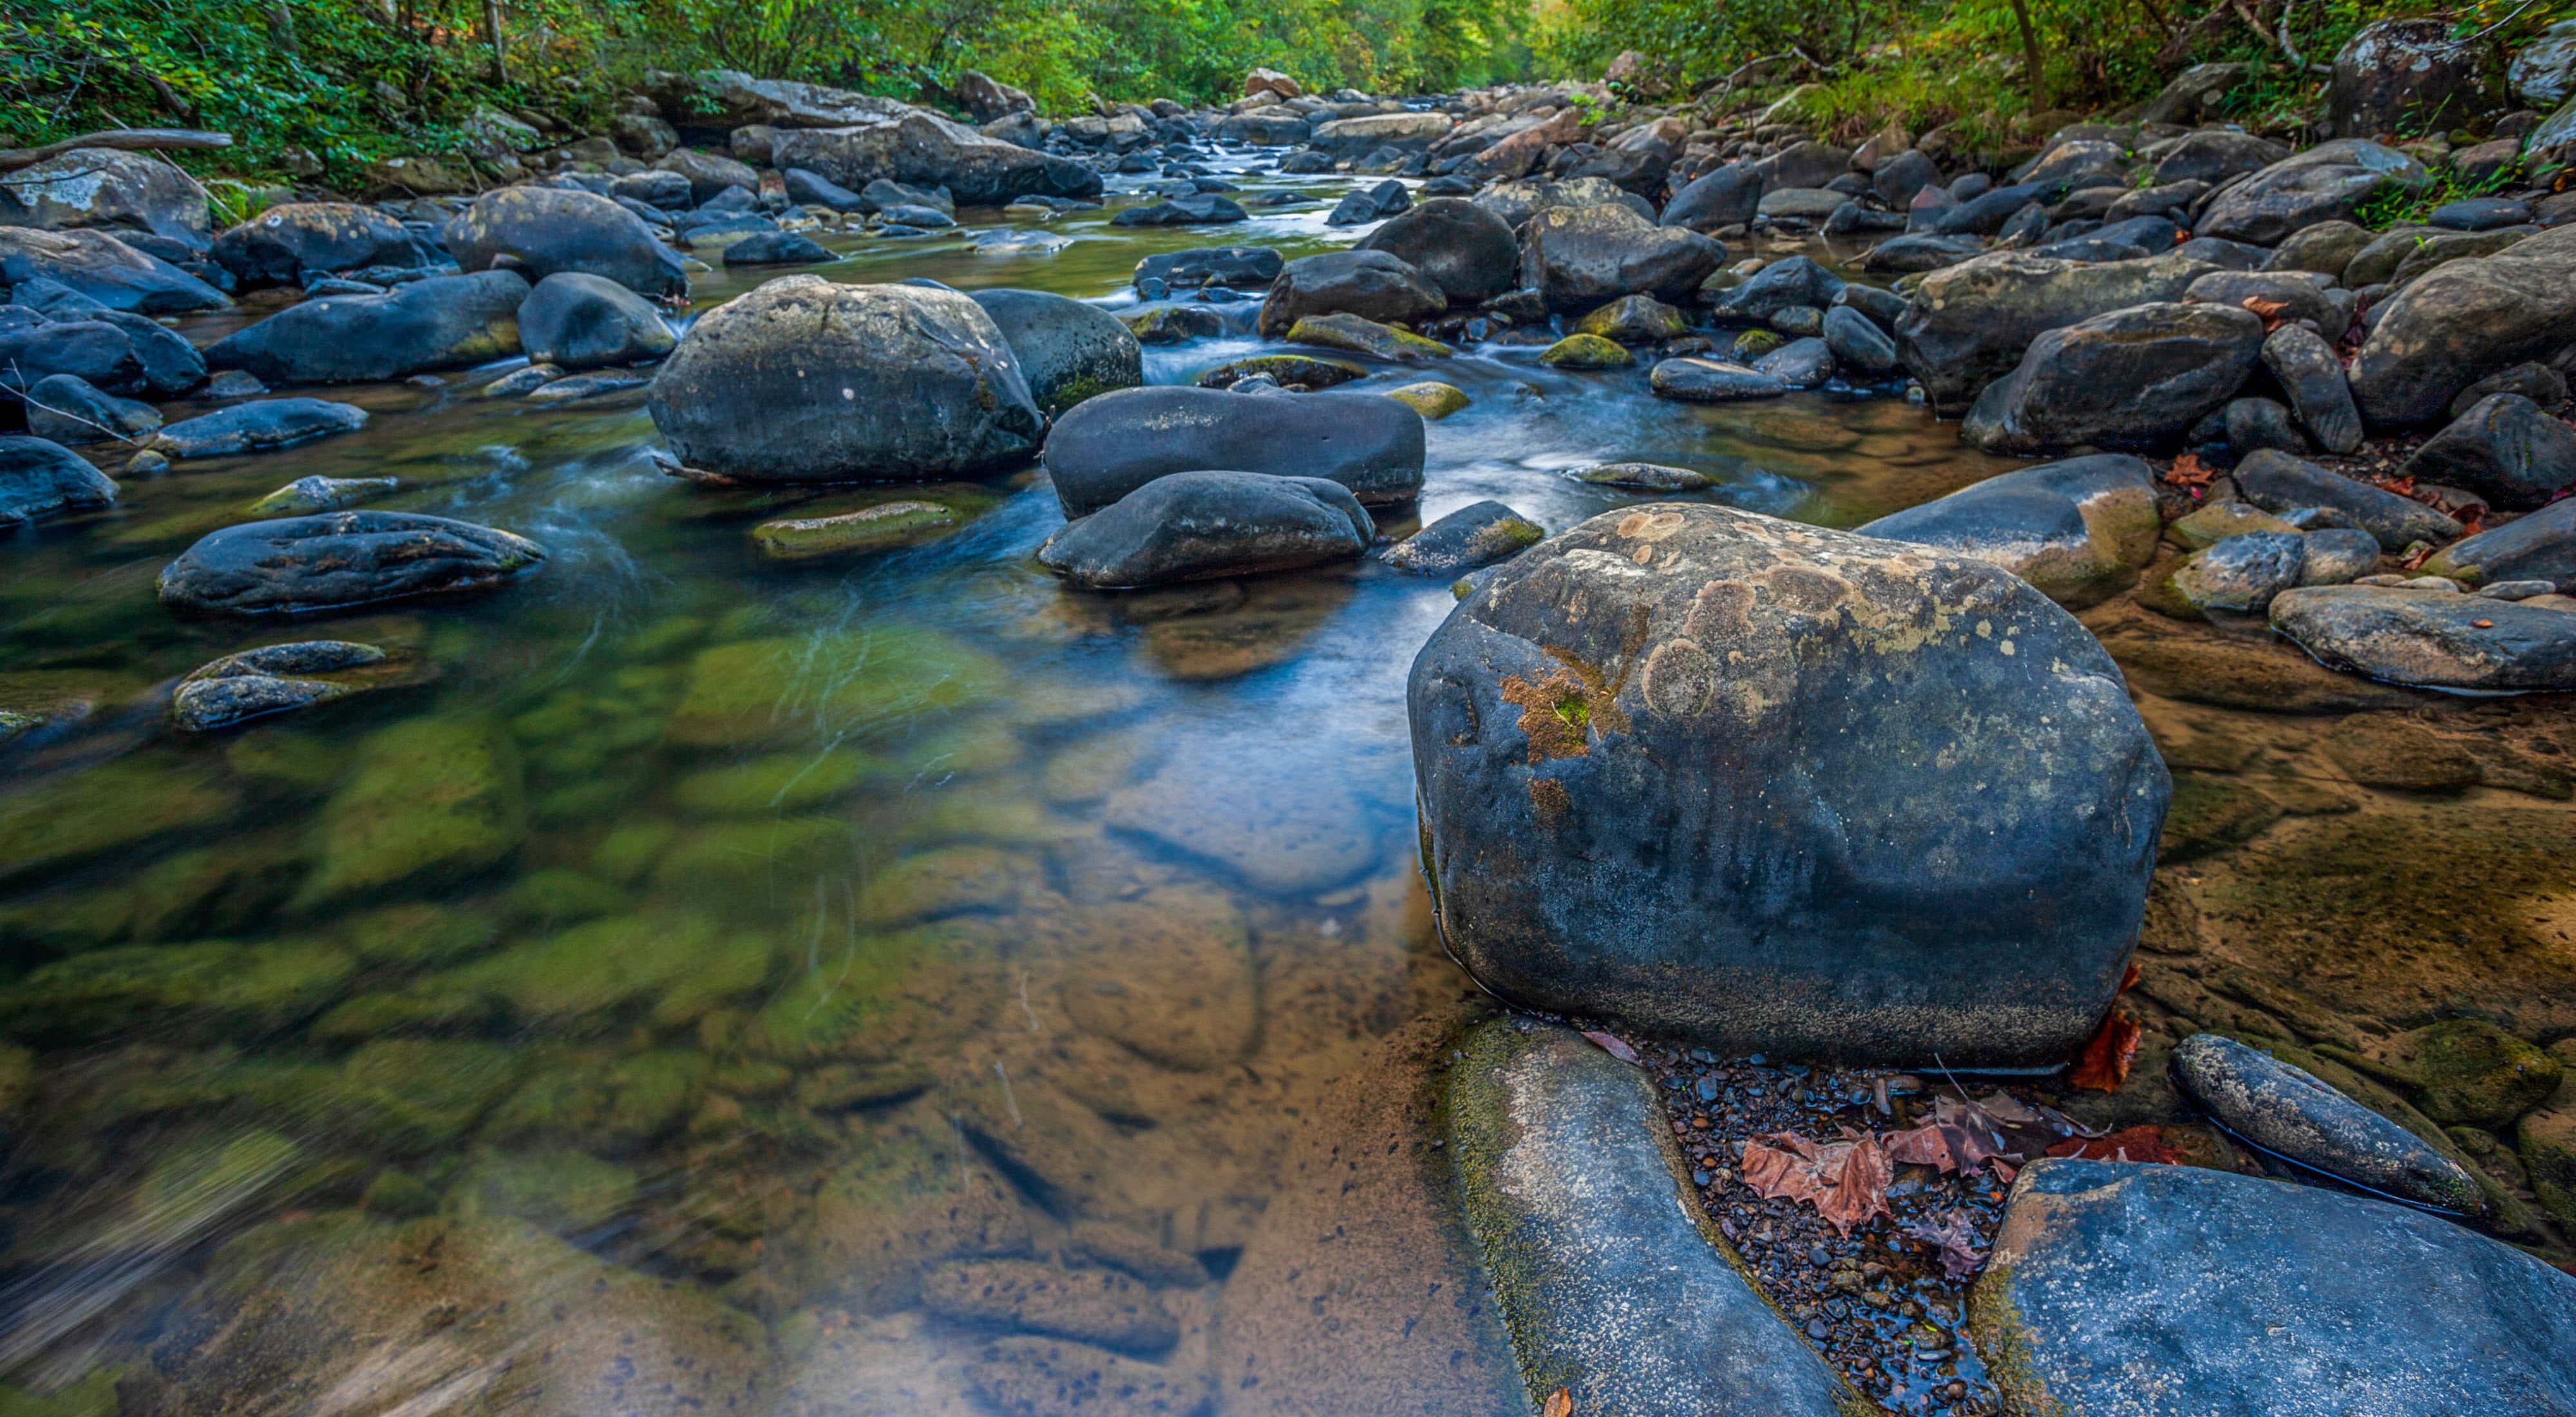 Clear water flows over a rocky creek bed.